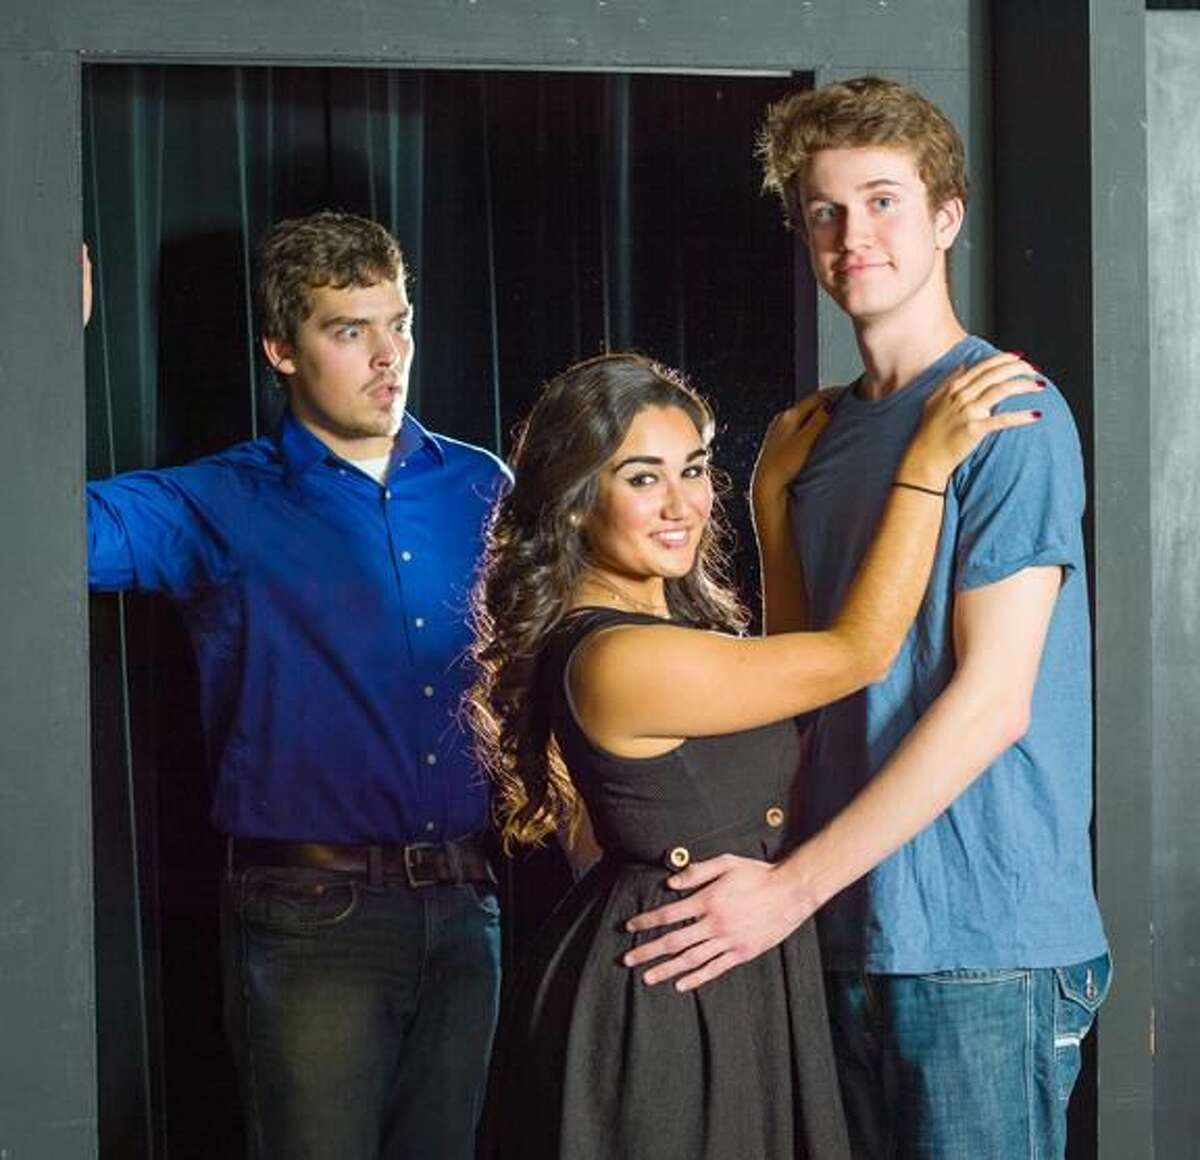 Submitted Photo Quinnipiac University students Gerard Lisella, left, Christina Comizio, Ryan Sheehan will play the leads in the Theater for Community production of “Arms and the Man,” Nov. 13-16 in the Clarice L. Buckman Theater on the Mount Carmel Campus at Quinnipiac.